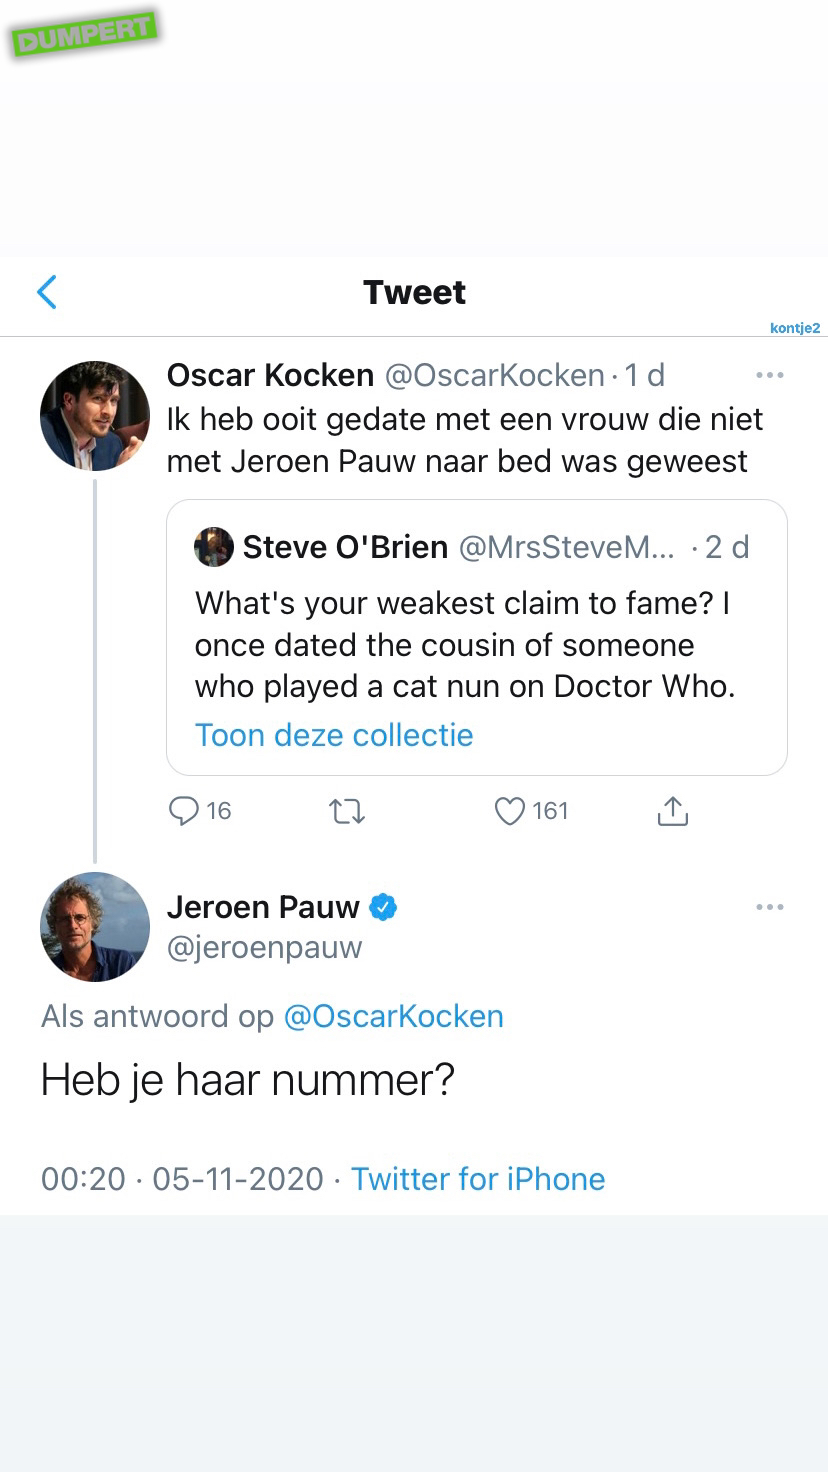 Jeroen Pauw has entered the chat